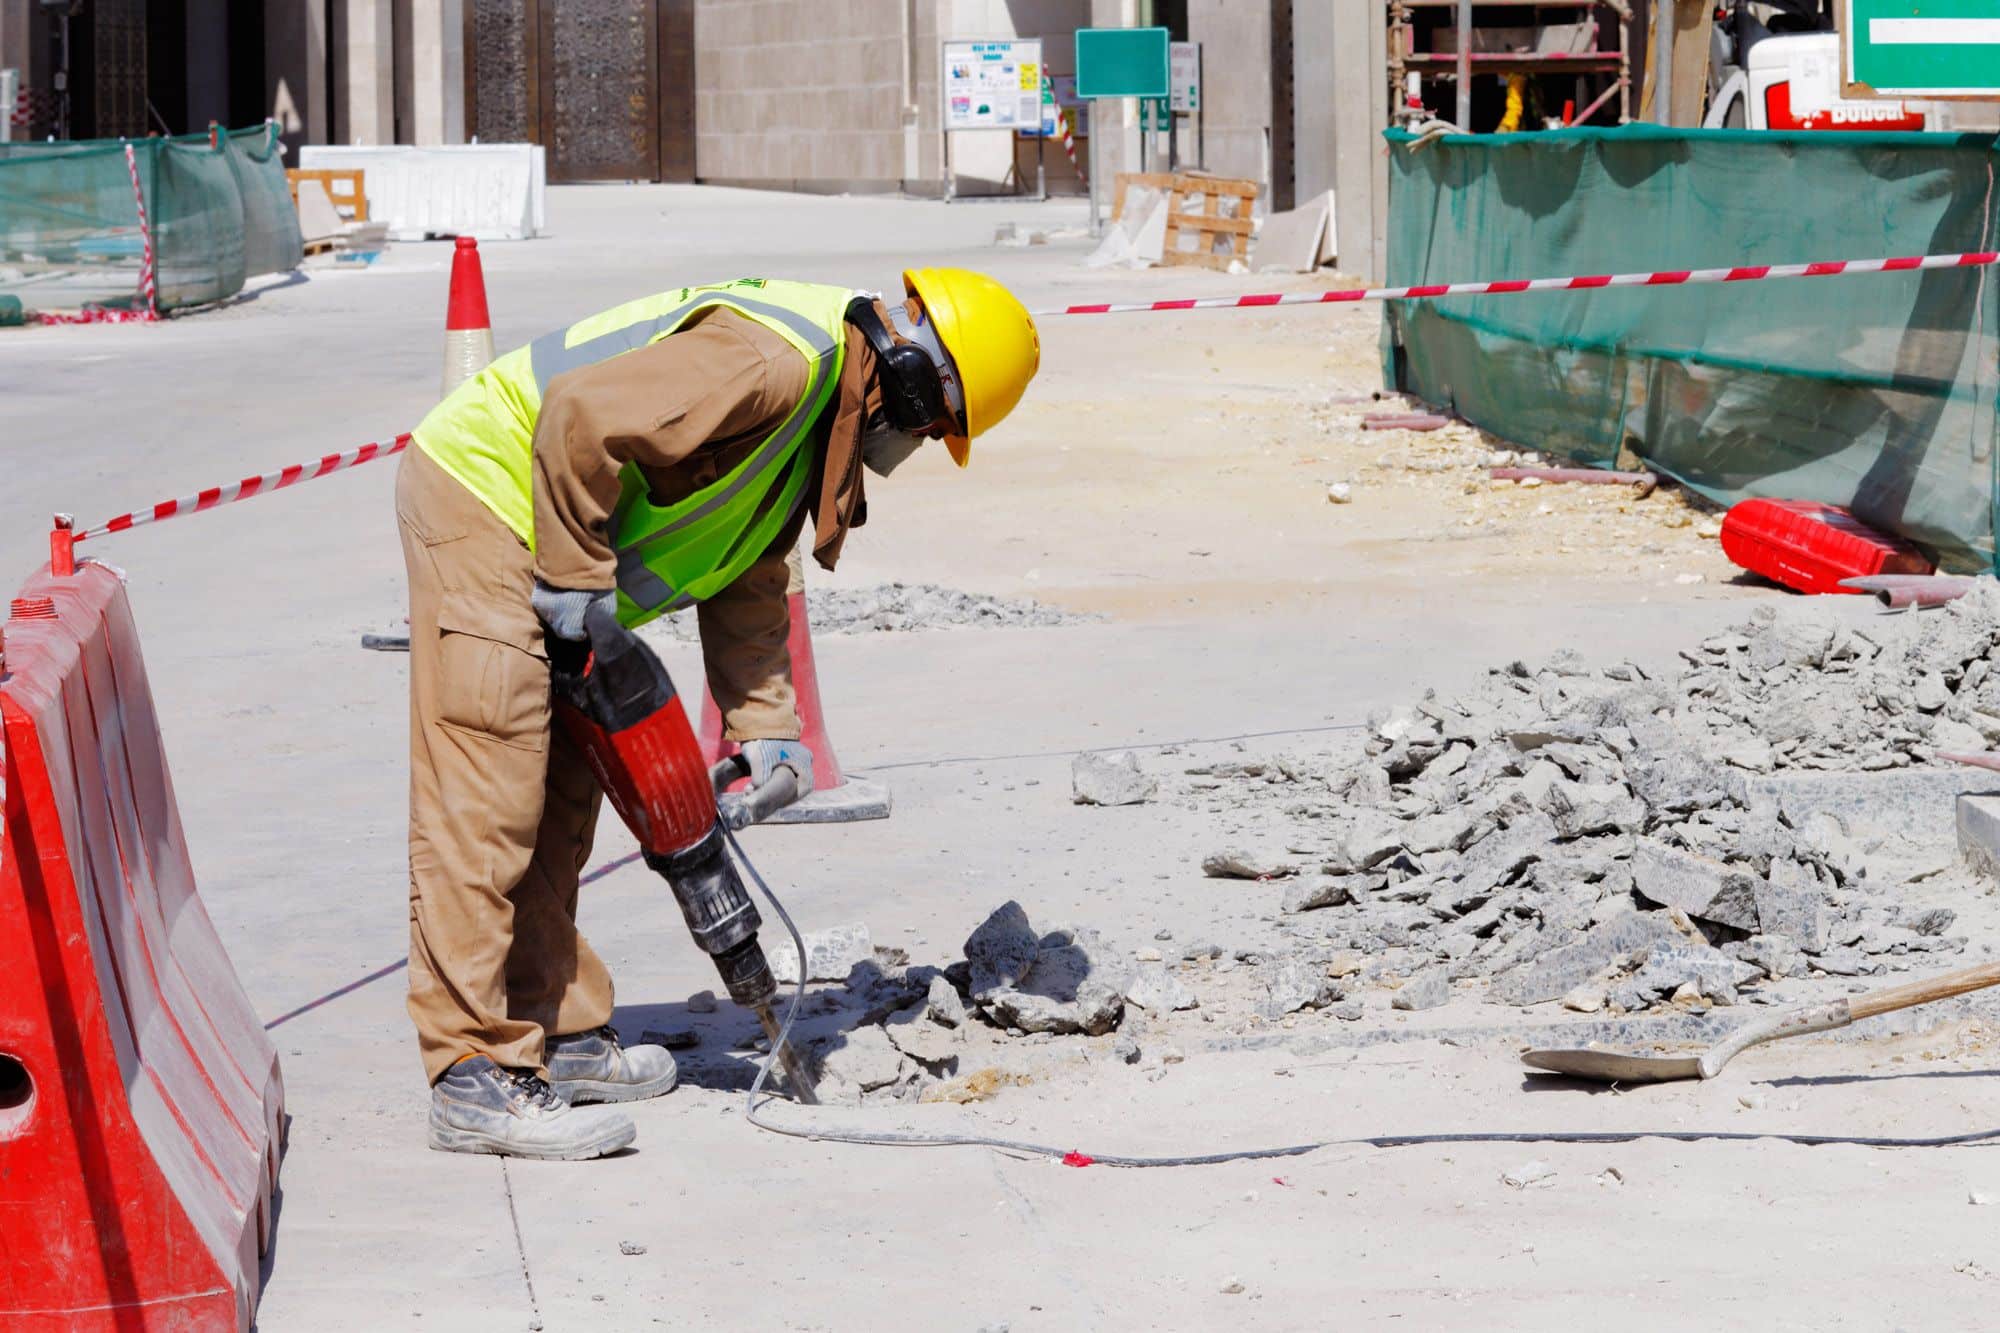 The image depicts a construction worker in a high-visibility vest and yellow hard hat using a red jackhammer to break up concrete on a construction site. There is debris scattered around the worker, indicating active work. The area is cordoned off with red and white safety barriers, and in the background, there's a green construction fence and some temporary site structures. The setting appears to be urban, with a clear sky suggesting a sunny day. The worker is focused on the task, emphasizing safety and work in progress.